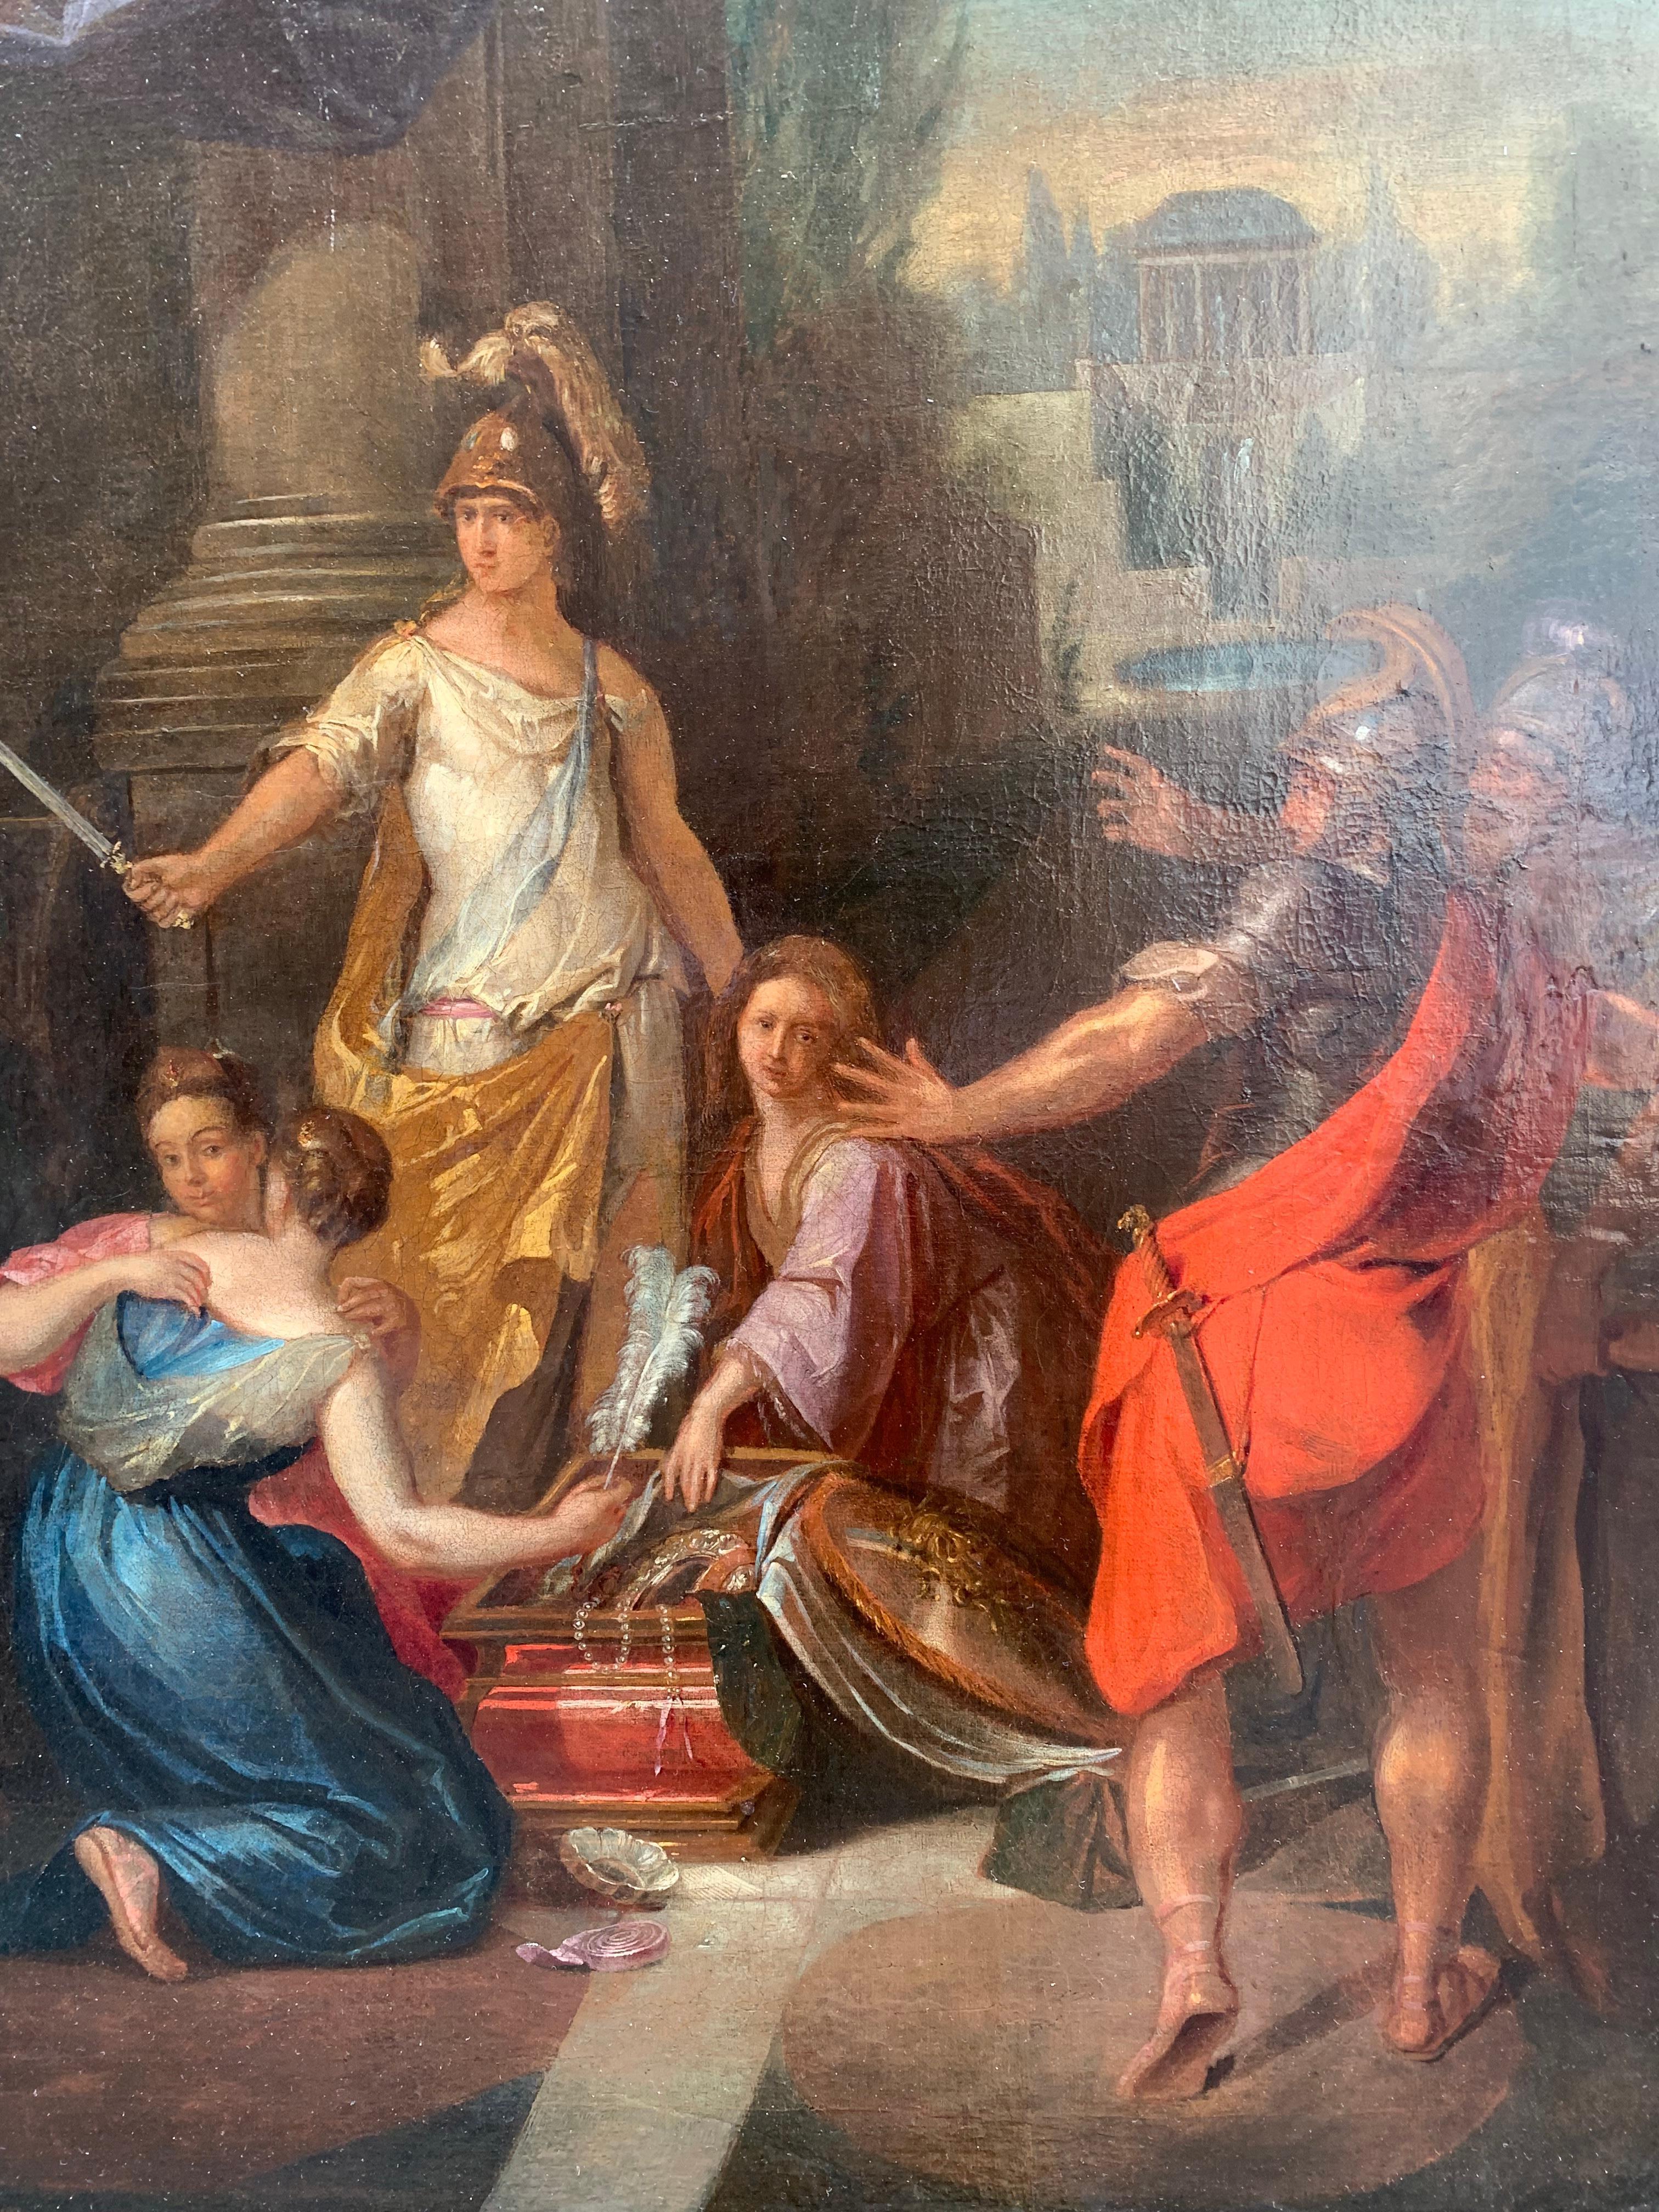 Achilles in the guise of a woman discovered by Ulysses. Dutch school, circa 1720 4